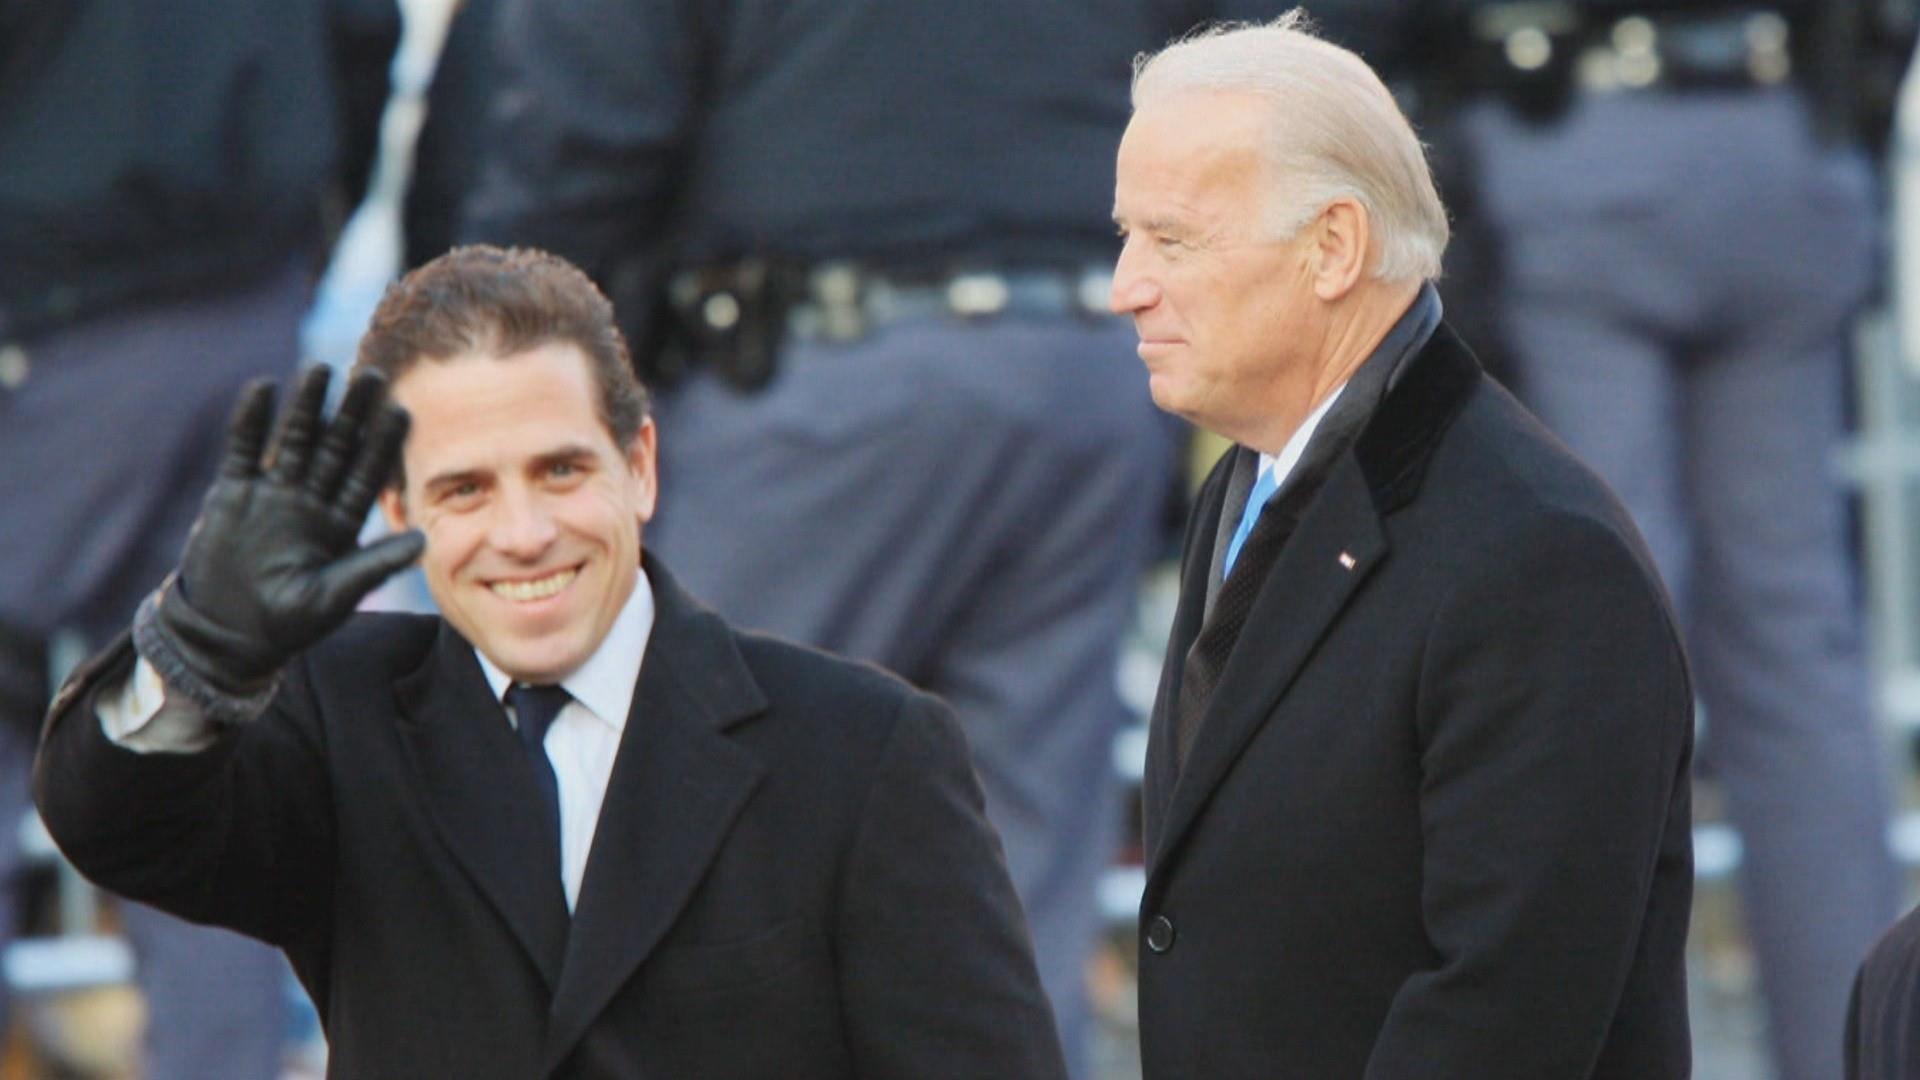 Feds Examining Whether Alleged Hunter Biden Emails Are Linked To A Foreign Intel Operation